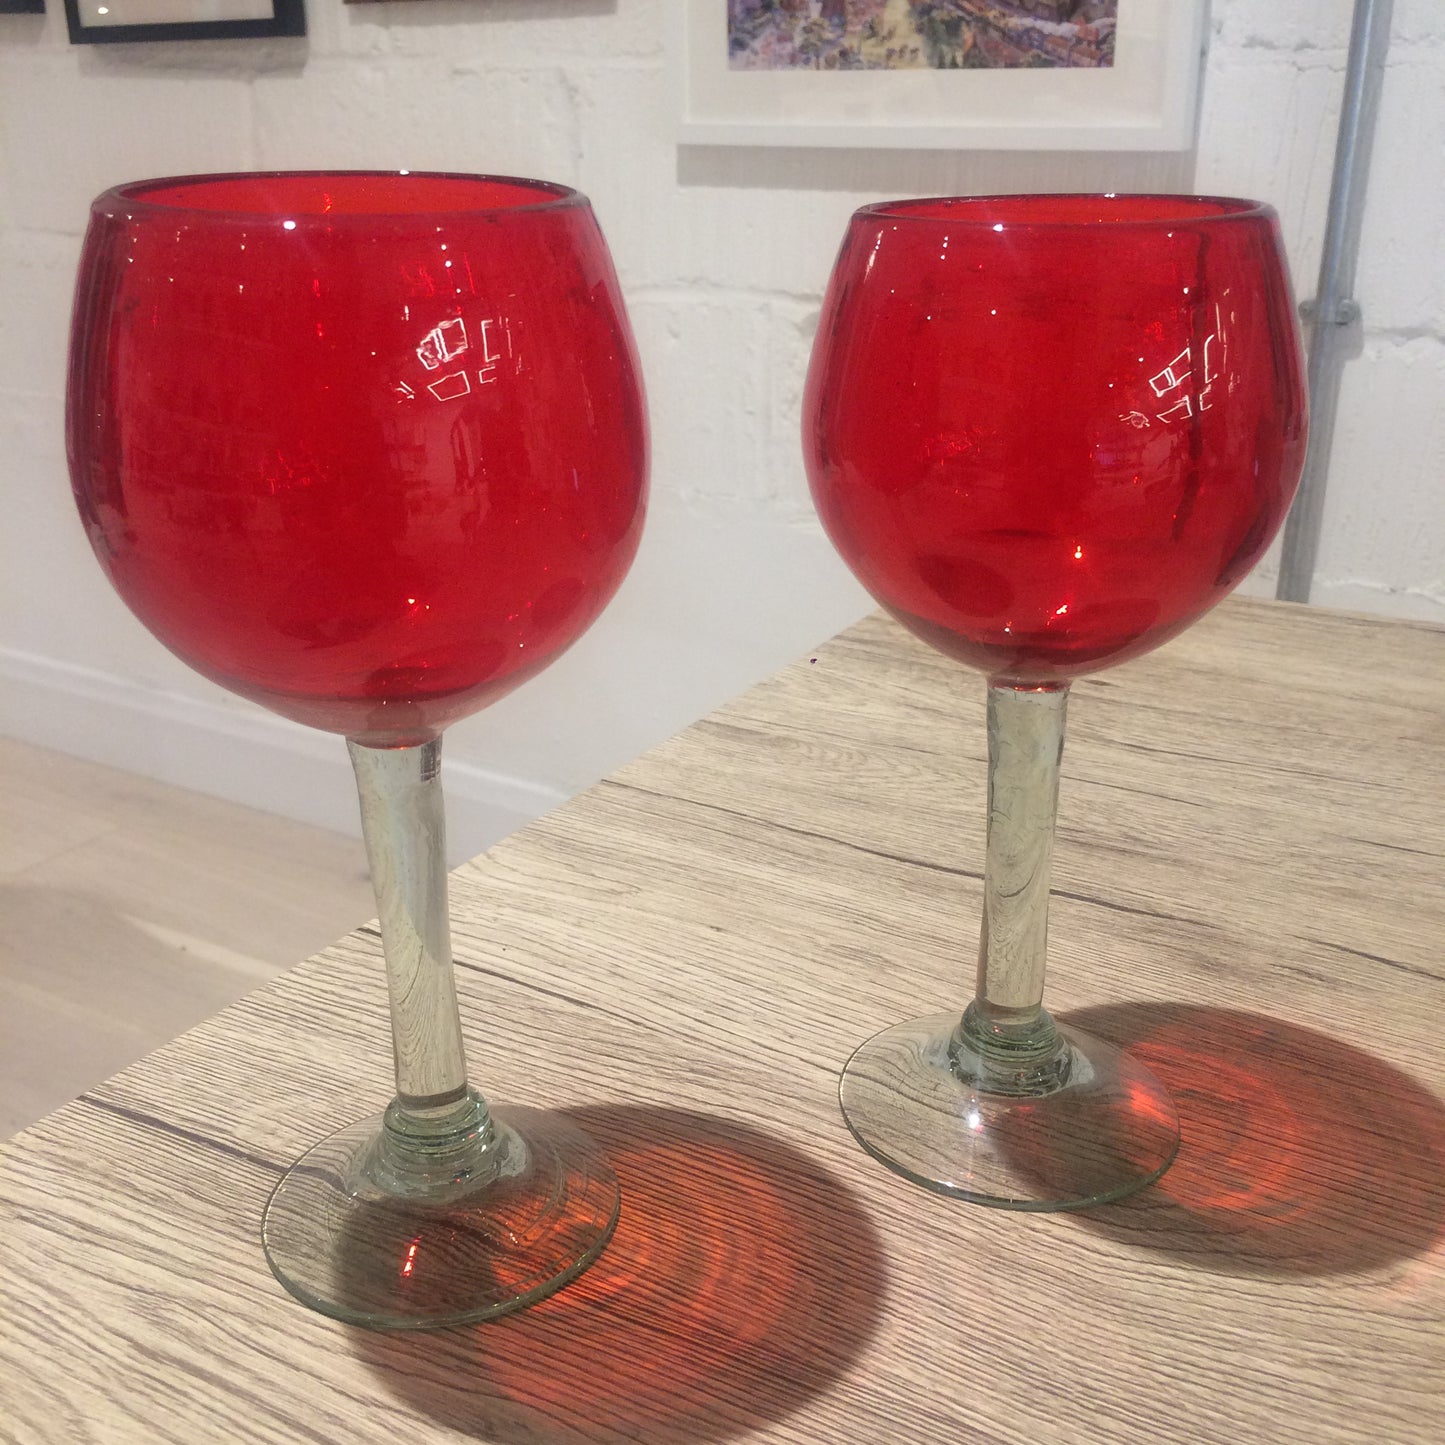 Hot Red - Wine Glass (one piece)